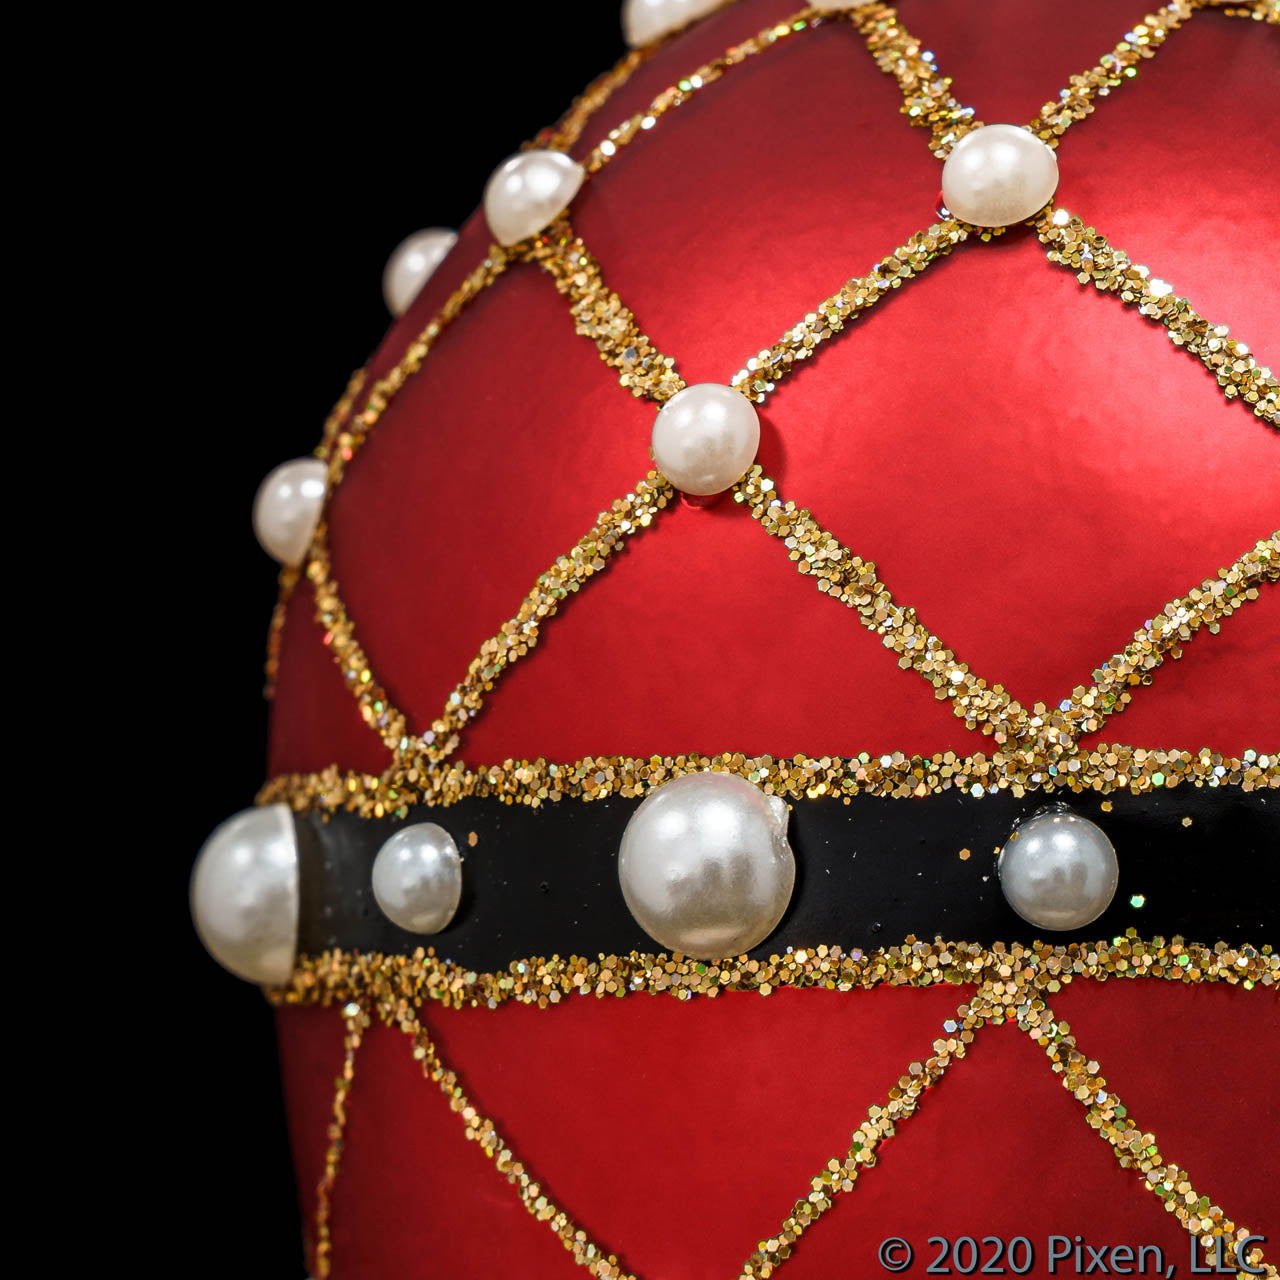 Reverie Faberge Egg Christmas Ornament in Red by Pixen